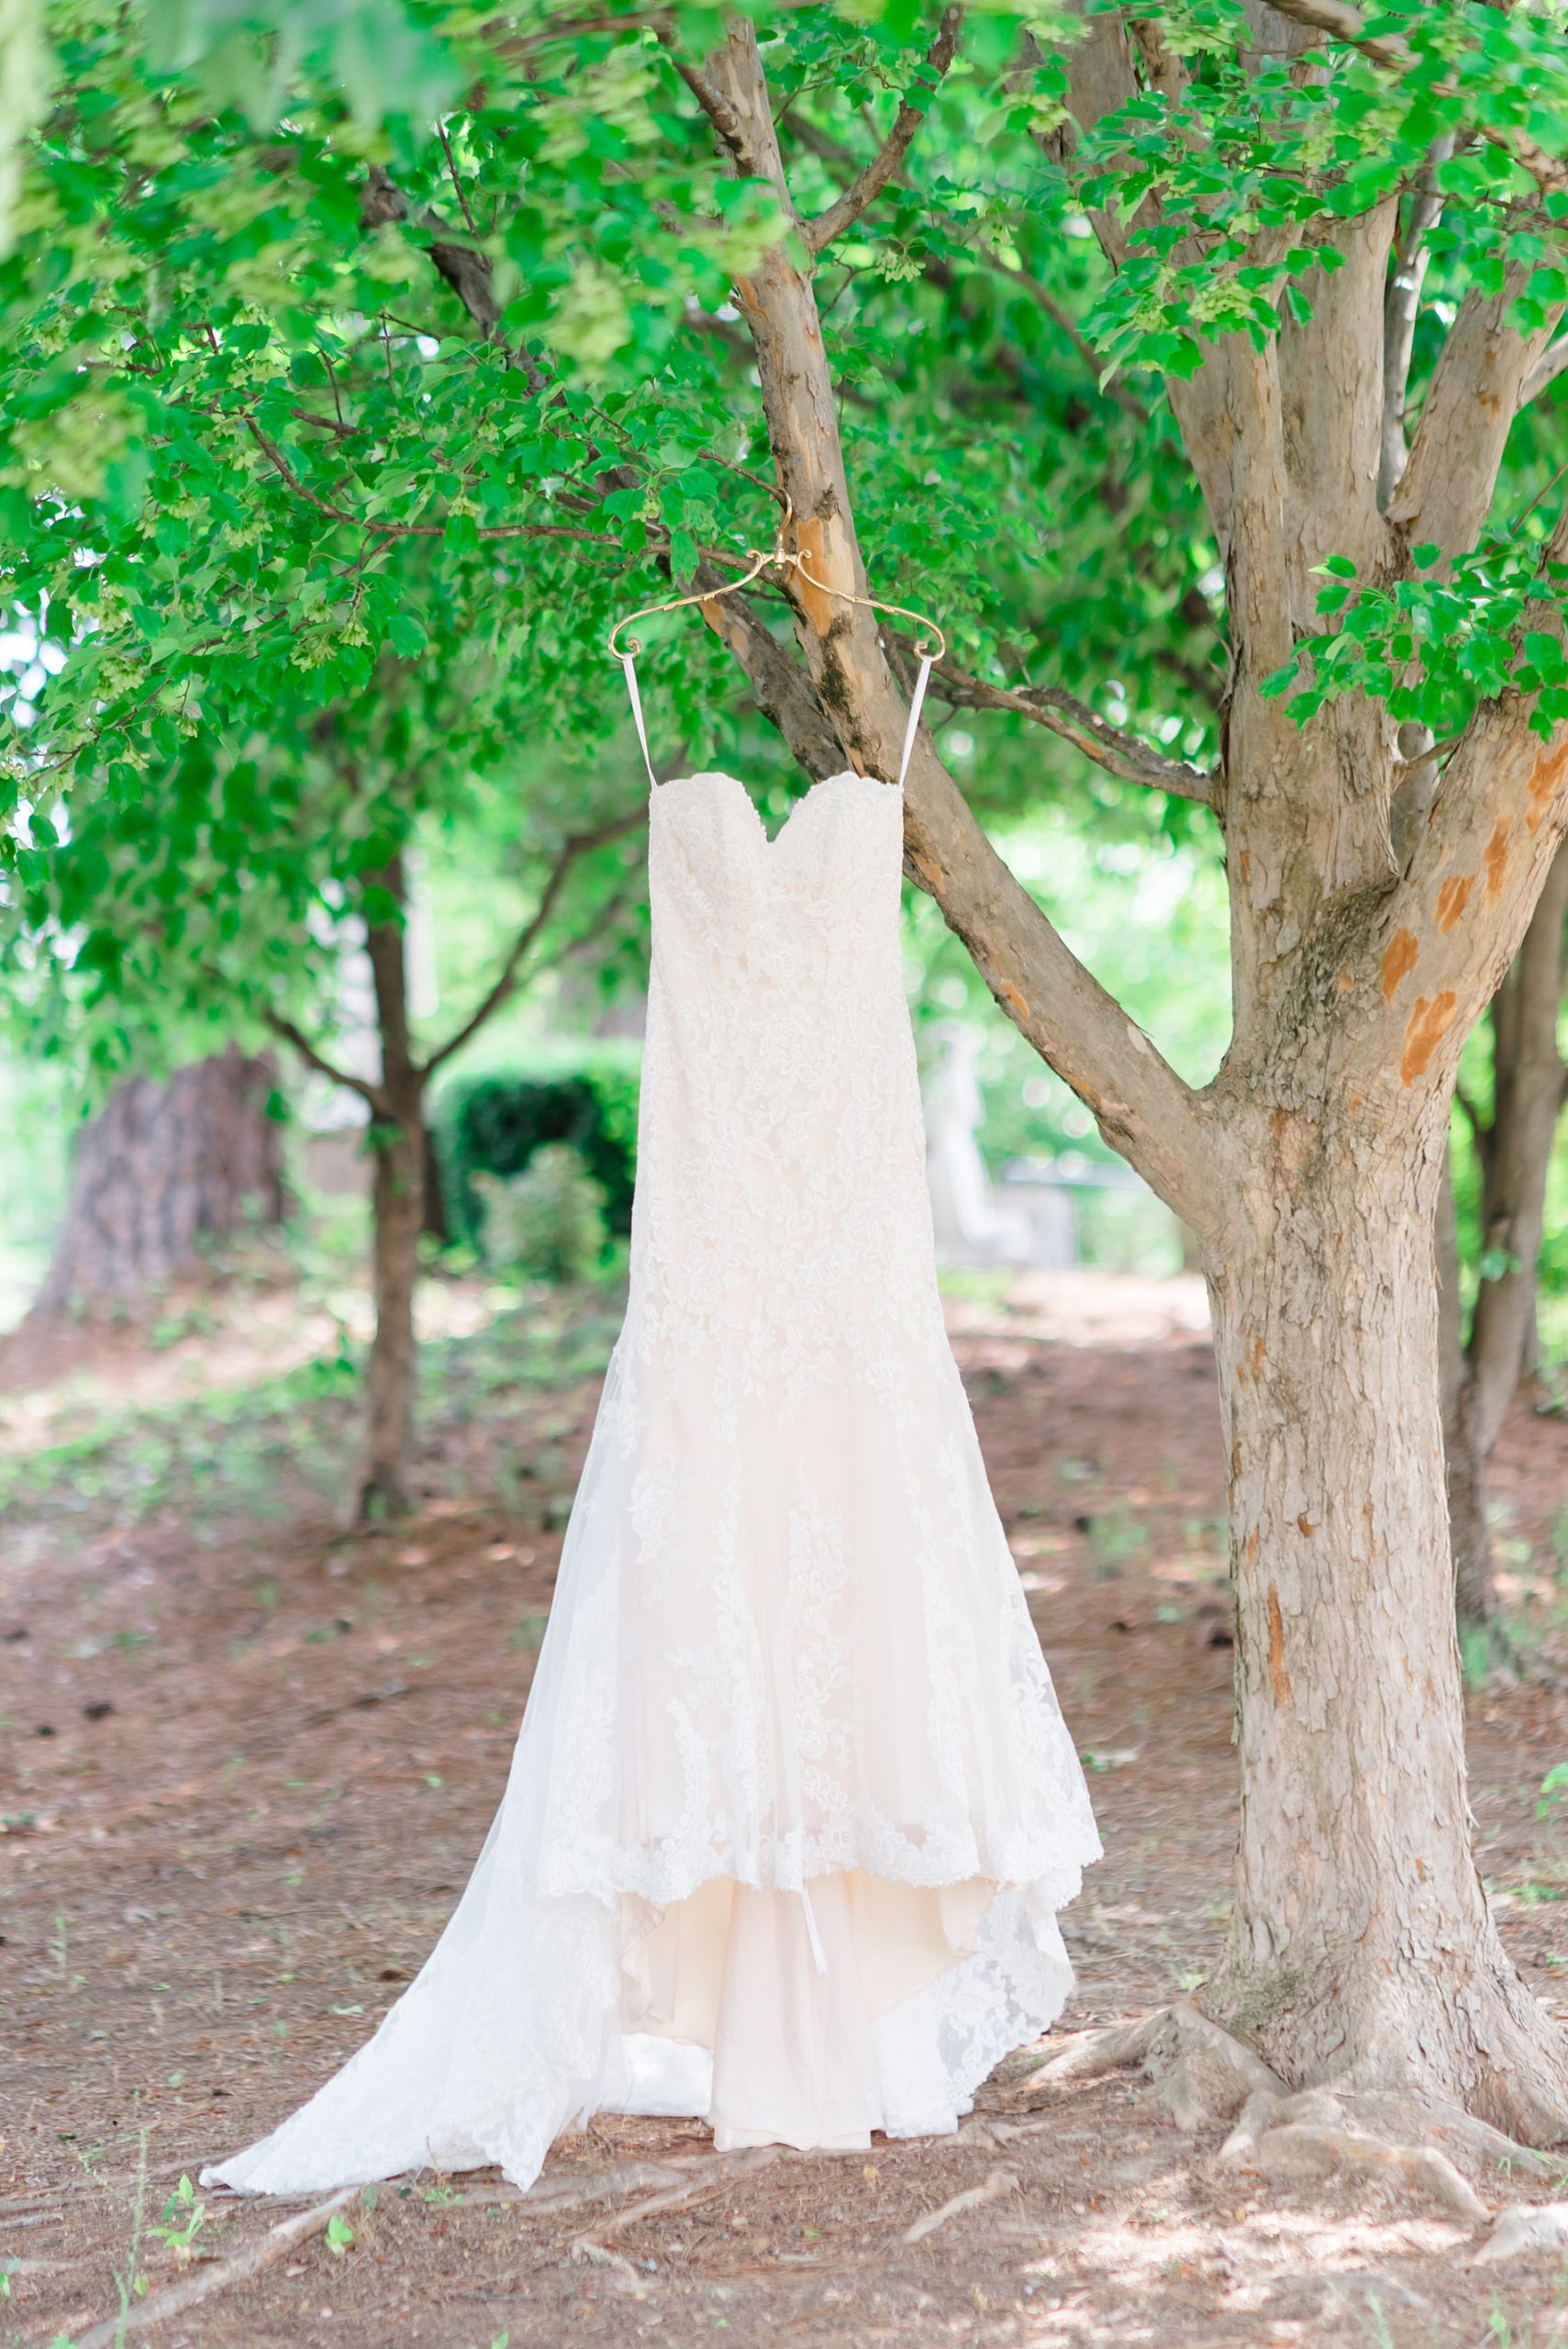 wedding dress hanging from tree outside